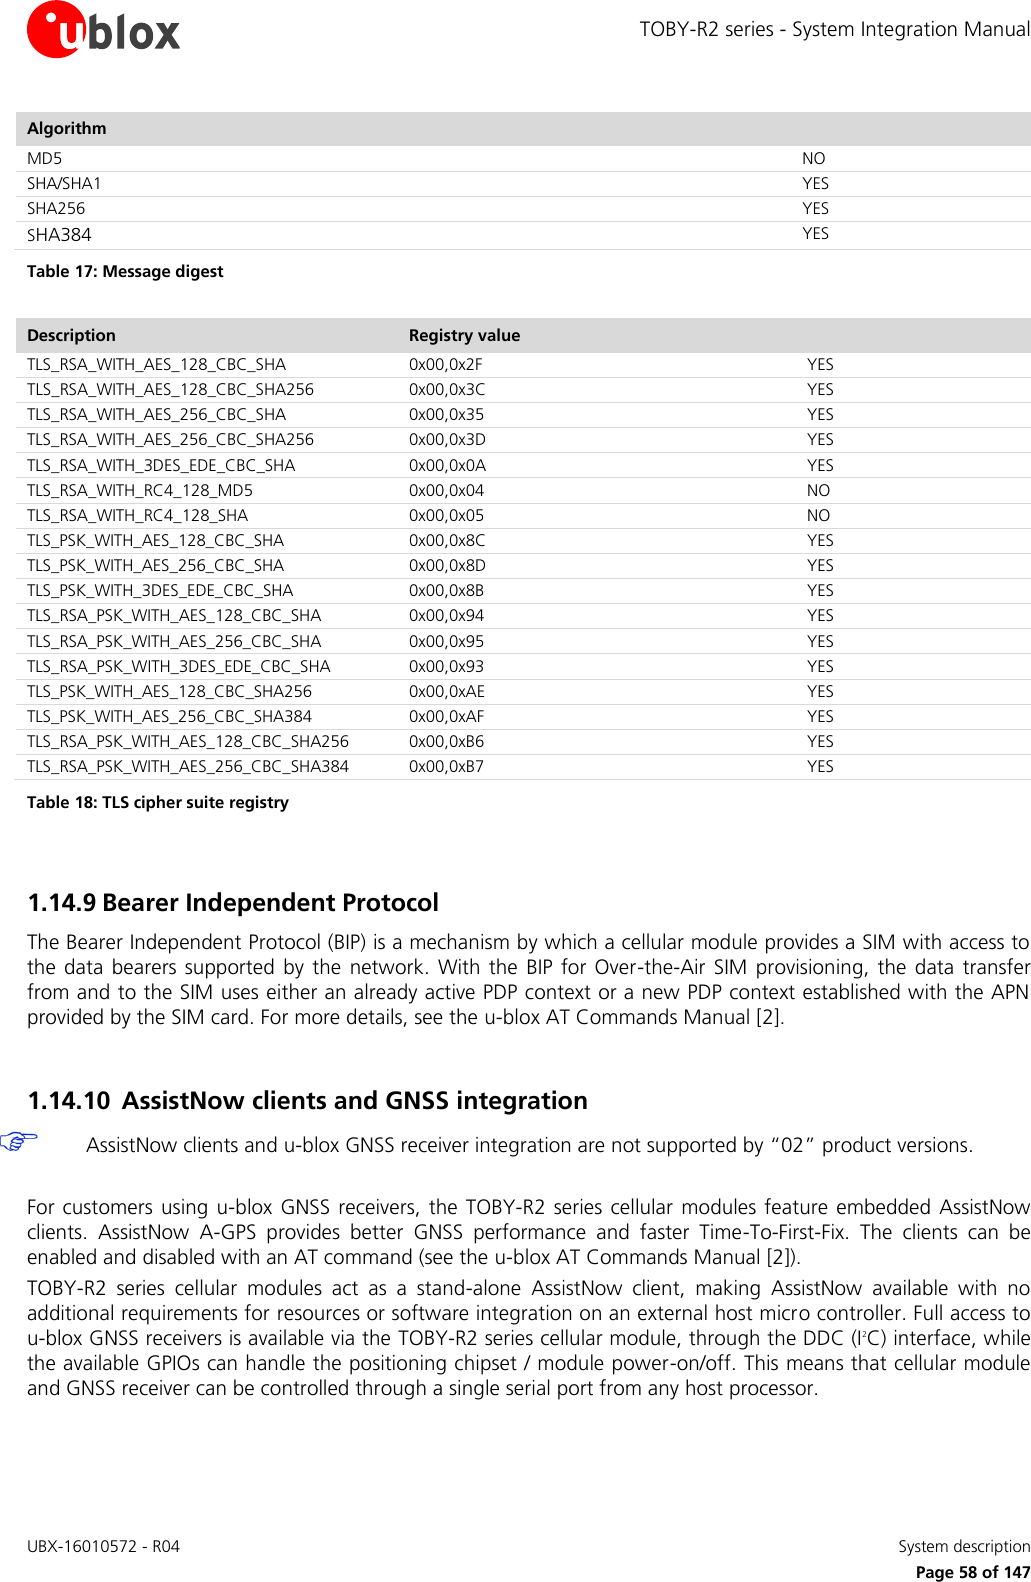 TOBY-R2 series - System Integration Manual UBX-16010572 - R04    System description     Page 58 of 147 Algorithm   MD5  NO SHA/SHA1  YES SHA256  YES SHA384  YES Table 17: Message digest  Description Registry value   TLS_RSA_WITH_AES_128_CBC_SHA 0x00,0x2F  YES TLS_RSA_WITH_AES_128_CBC_SHA256 0x00,0x3C  YES TLS_RSA_WITH_AES_256_CBC_SHA 0x00,0x35  YES TLS_RSA_WITH_AES_256_CBC_SHA256 0x00,0x3D  YES TLS_RSA_WITH_3DES_EDE_CBC_SHA 0x00,0x0A  YES TLS_RSA_WITH_RC4_128_MD5 0x00,0x04  NO TLS_RSA_WITH_RC4_128_SHA 0x00,0x05  NO TLS_PSK_WITH_AES_128_CBC_SHA 0x00,0x8C  YES TLS_PSK_WITH_AES_256_CBC_SHA 0x00,0x8D  YES TLS_PSK_WITH_3DES_EDE_CBC_SHA 0x00,0x8B  YES TLS_RSA_PSK_WITH_AES_128_CBC_SHA 0x00,0x94  YES TLS_RSA_PSK_WITH_AES_256_CBC_SHA 0x00,0x95  YES TLS_RSA_PSK_WITH_3DES_EDE_CBC_SHA 0x00,0x93  YES TLS_PSK_WITH_AES_128_CBC_SHA256 0x00,0xAE  YES TLS_PSK_WITH_AES_256_CBC_SHA384 0x00,0xAF  YES TLS_RSA_PSK_WITH_AES_128_CBC_SHA256 0x00,0xB6  YES TLS_RSA_PSK_WITH_AES_256_CBC_SHA384 0x00,0xB7  YES Table 18: TLS cipher suite registry  1.14.9 Bearer Independent Protocol The Bearer Independent Protocol (BIP) is a mechanism by which a cellular module provides a SIM with access to the  data bearers supported  by the  network.  With the  BIP  for Over-the-Air SIM  provisioning,  the  data  transfer from and to the SIM uses either an already active PDP context or a new PDP context established with the APN provided by the SIM card. For more details, see the u-blox AT Commands Manual [2].  1.14.10 AssistNow clients and GNSS integration  AssistNow clients and u-blox GNSS receiver integration are not supported by “02” product versions.  For customers  using u-blox  GNSS receivers,  the TOBY-R2 series  cellular modules  feature  embedded AssistNow clients.  AssistNow  A-GPS  provides  better  GNSS  performance  and  faster  Time-To-First-Fix.  The  clients  can  be enabled and disabled with an AT command (see the u-blox AT Commands Manual [2]). TOBY-R2  series  cellular  modules  act  as  a  stand-alone  AssistNow  client,  making  AssistNow  available  with  no additional requirements for resources or software integration on an external host micro controller. Full access to u-blox GNSS receivers is available via the TOBY-R2 series cellular module, through the DDC (I2C) interface, while the available GPIOs can handle the positioning chipset / module power-on/off. This means that cellular module and GNSS receiver can be controlled through a single serial port from any host processor.  